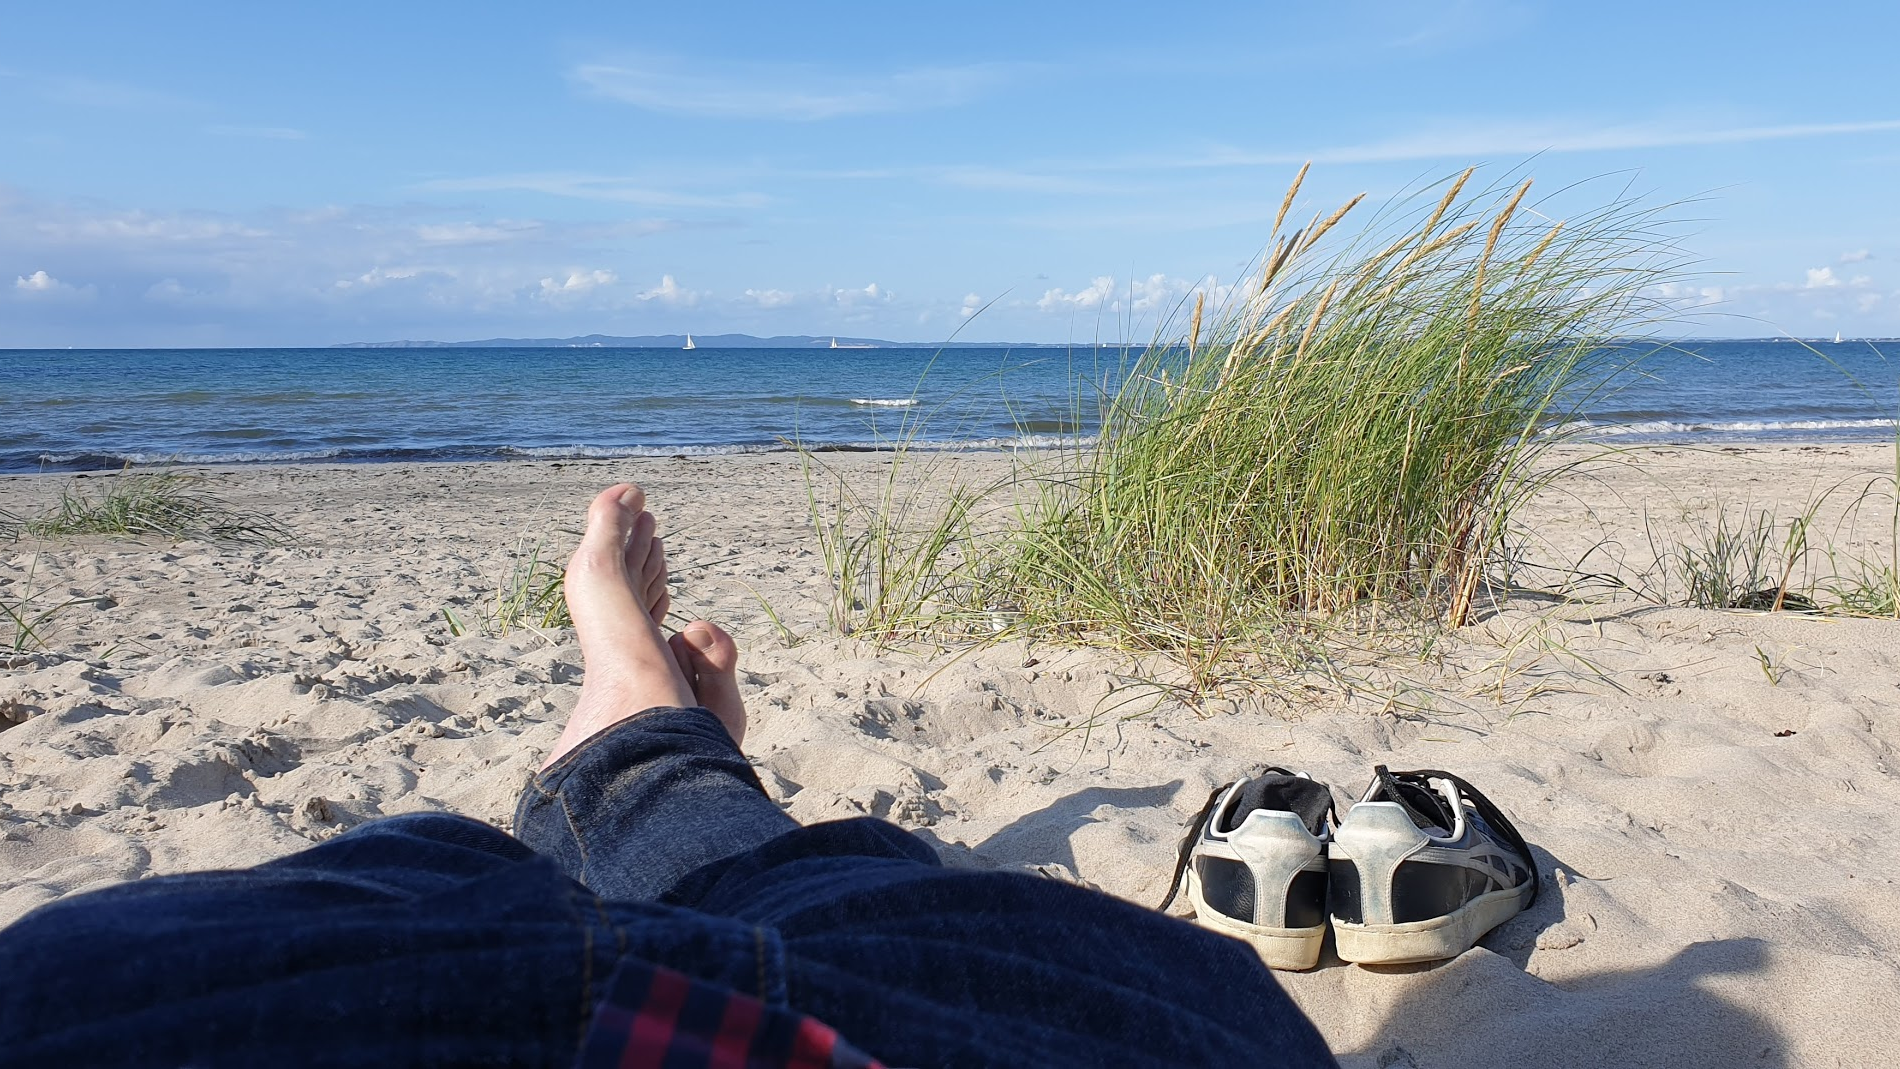 Sitting on the beach to show how relaxing Denmark can be